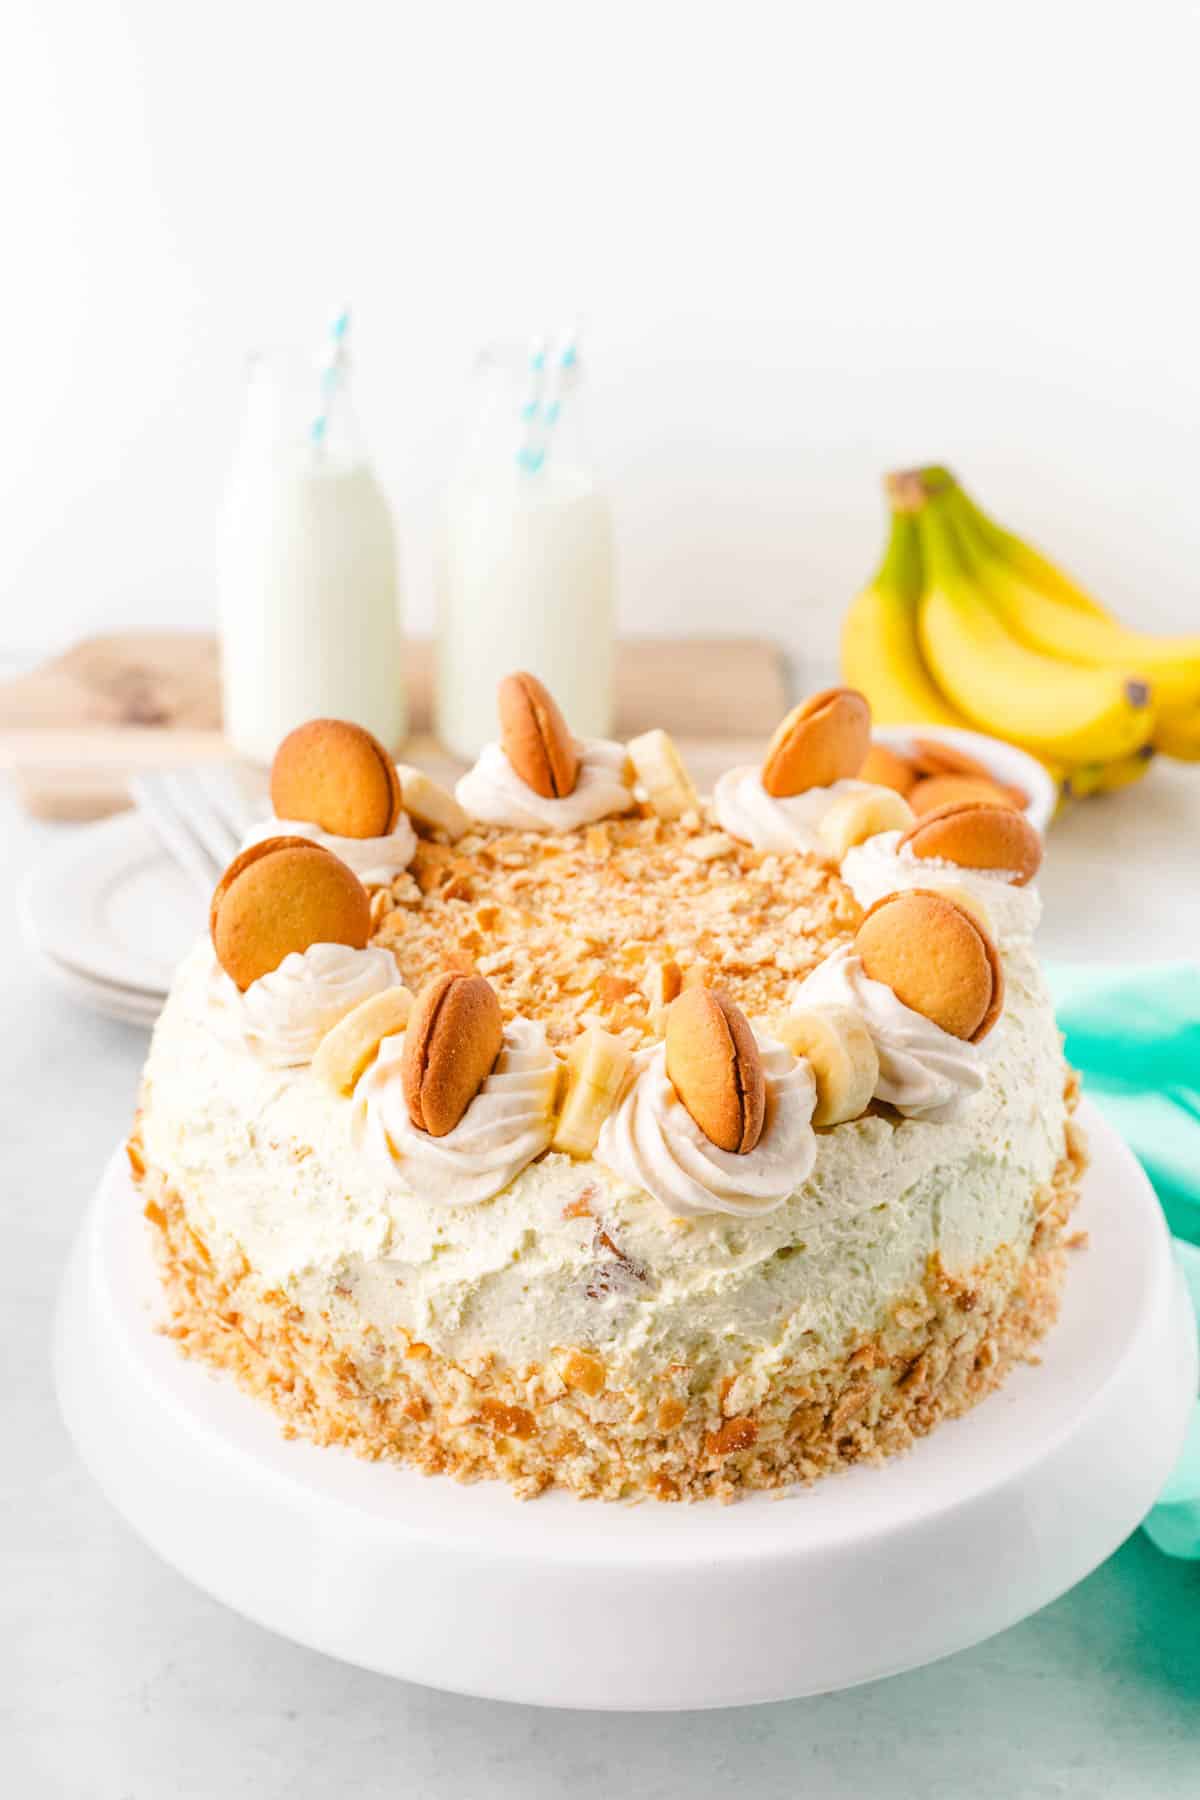 A banana pudding cake garnished with vanilla wafers and slice bananas on a white cake pedestal.